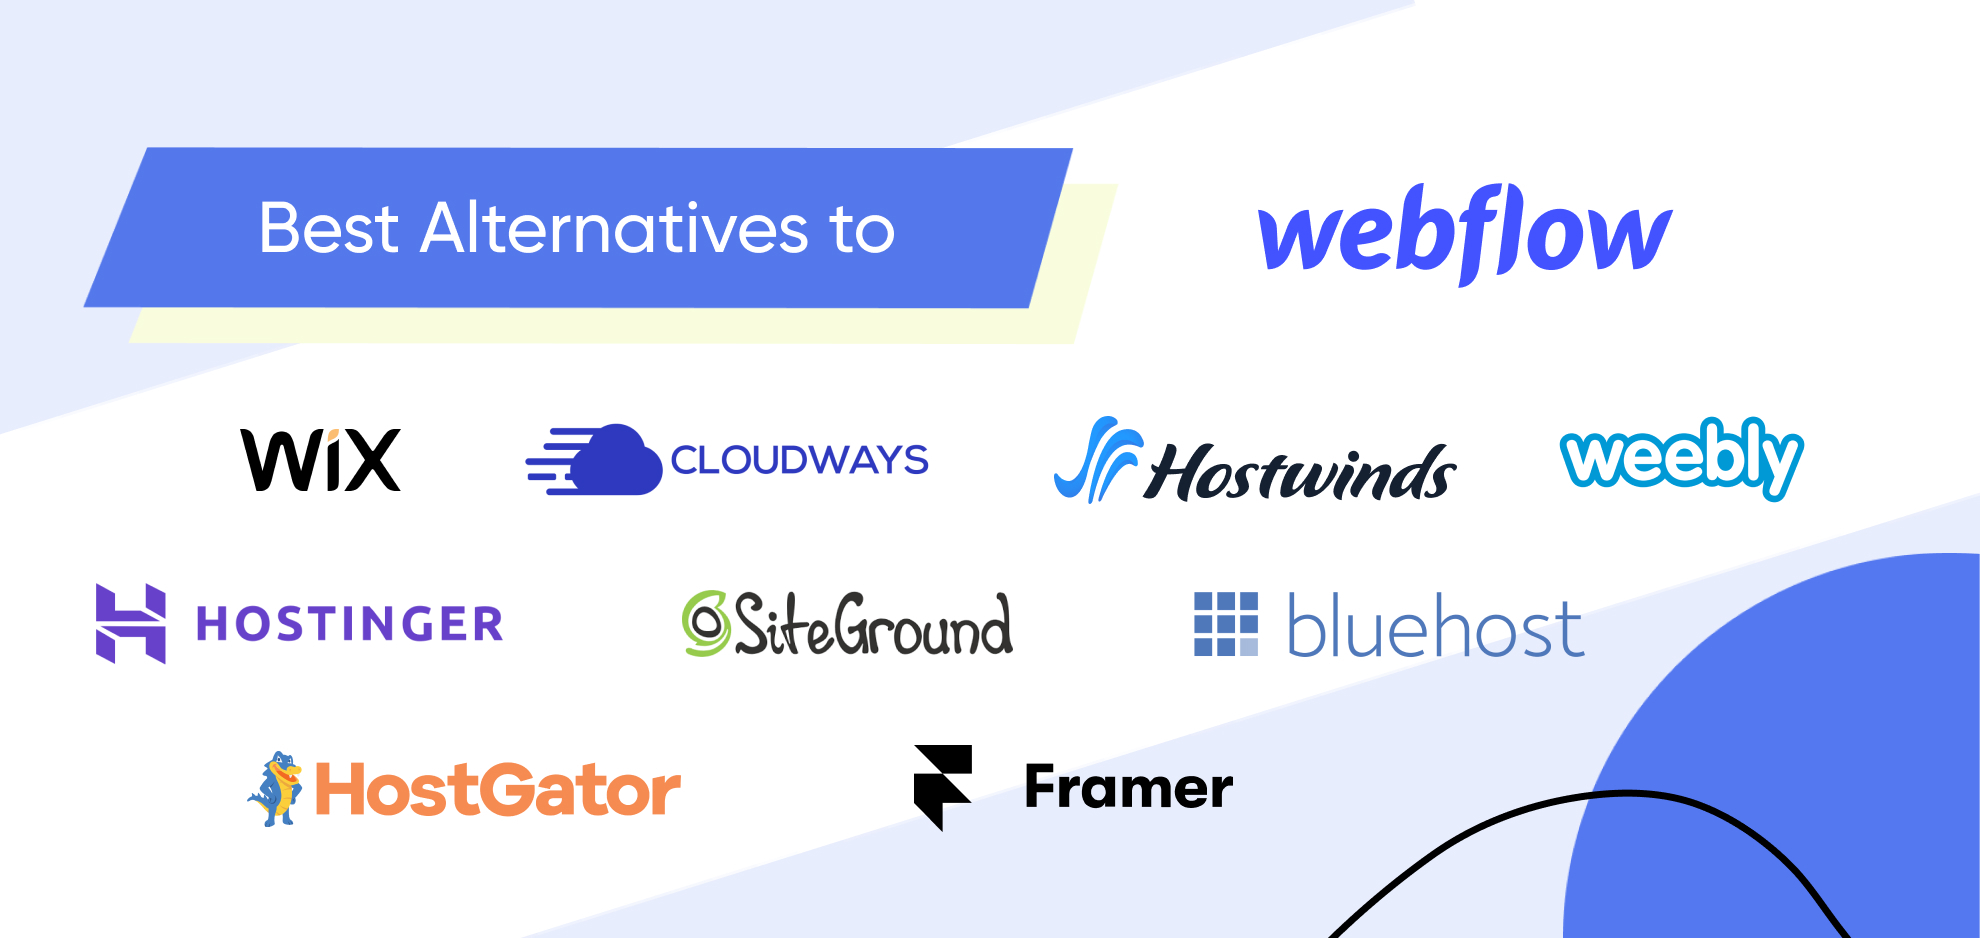 Webflow Alternatives and Competitors